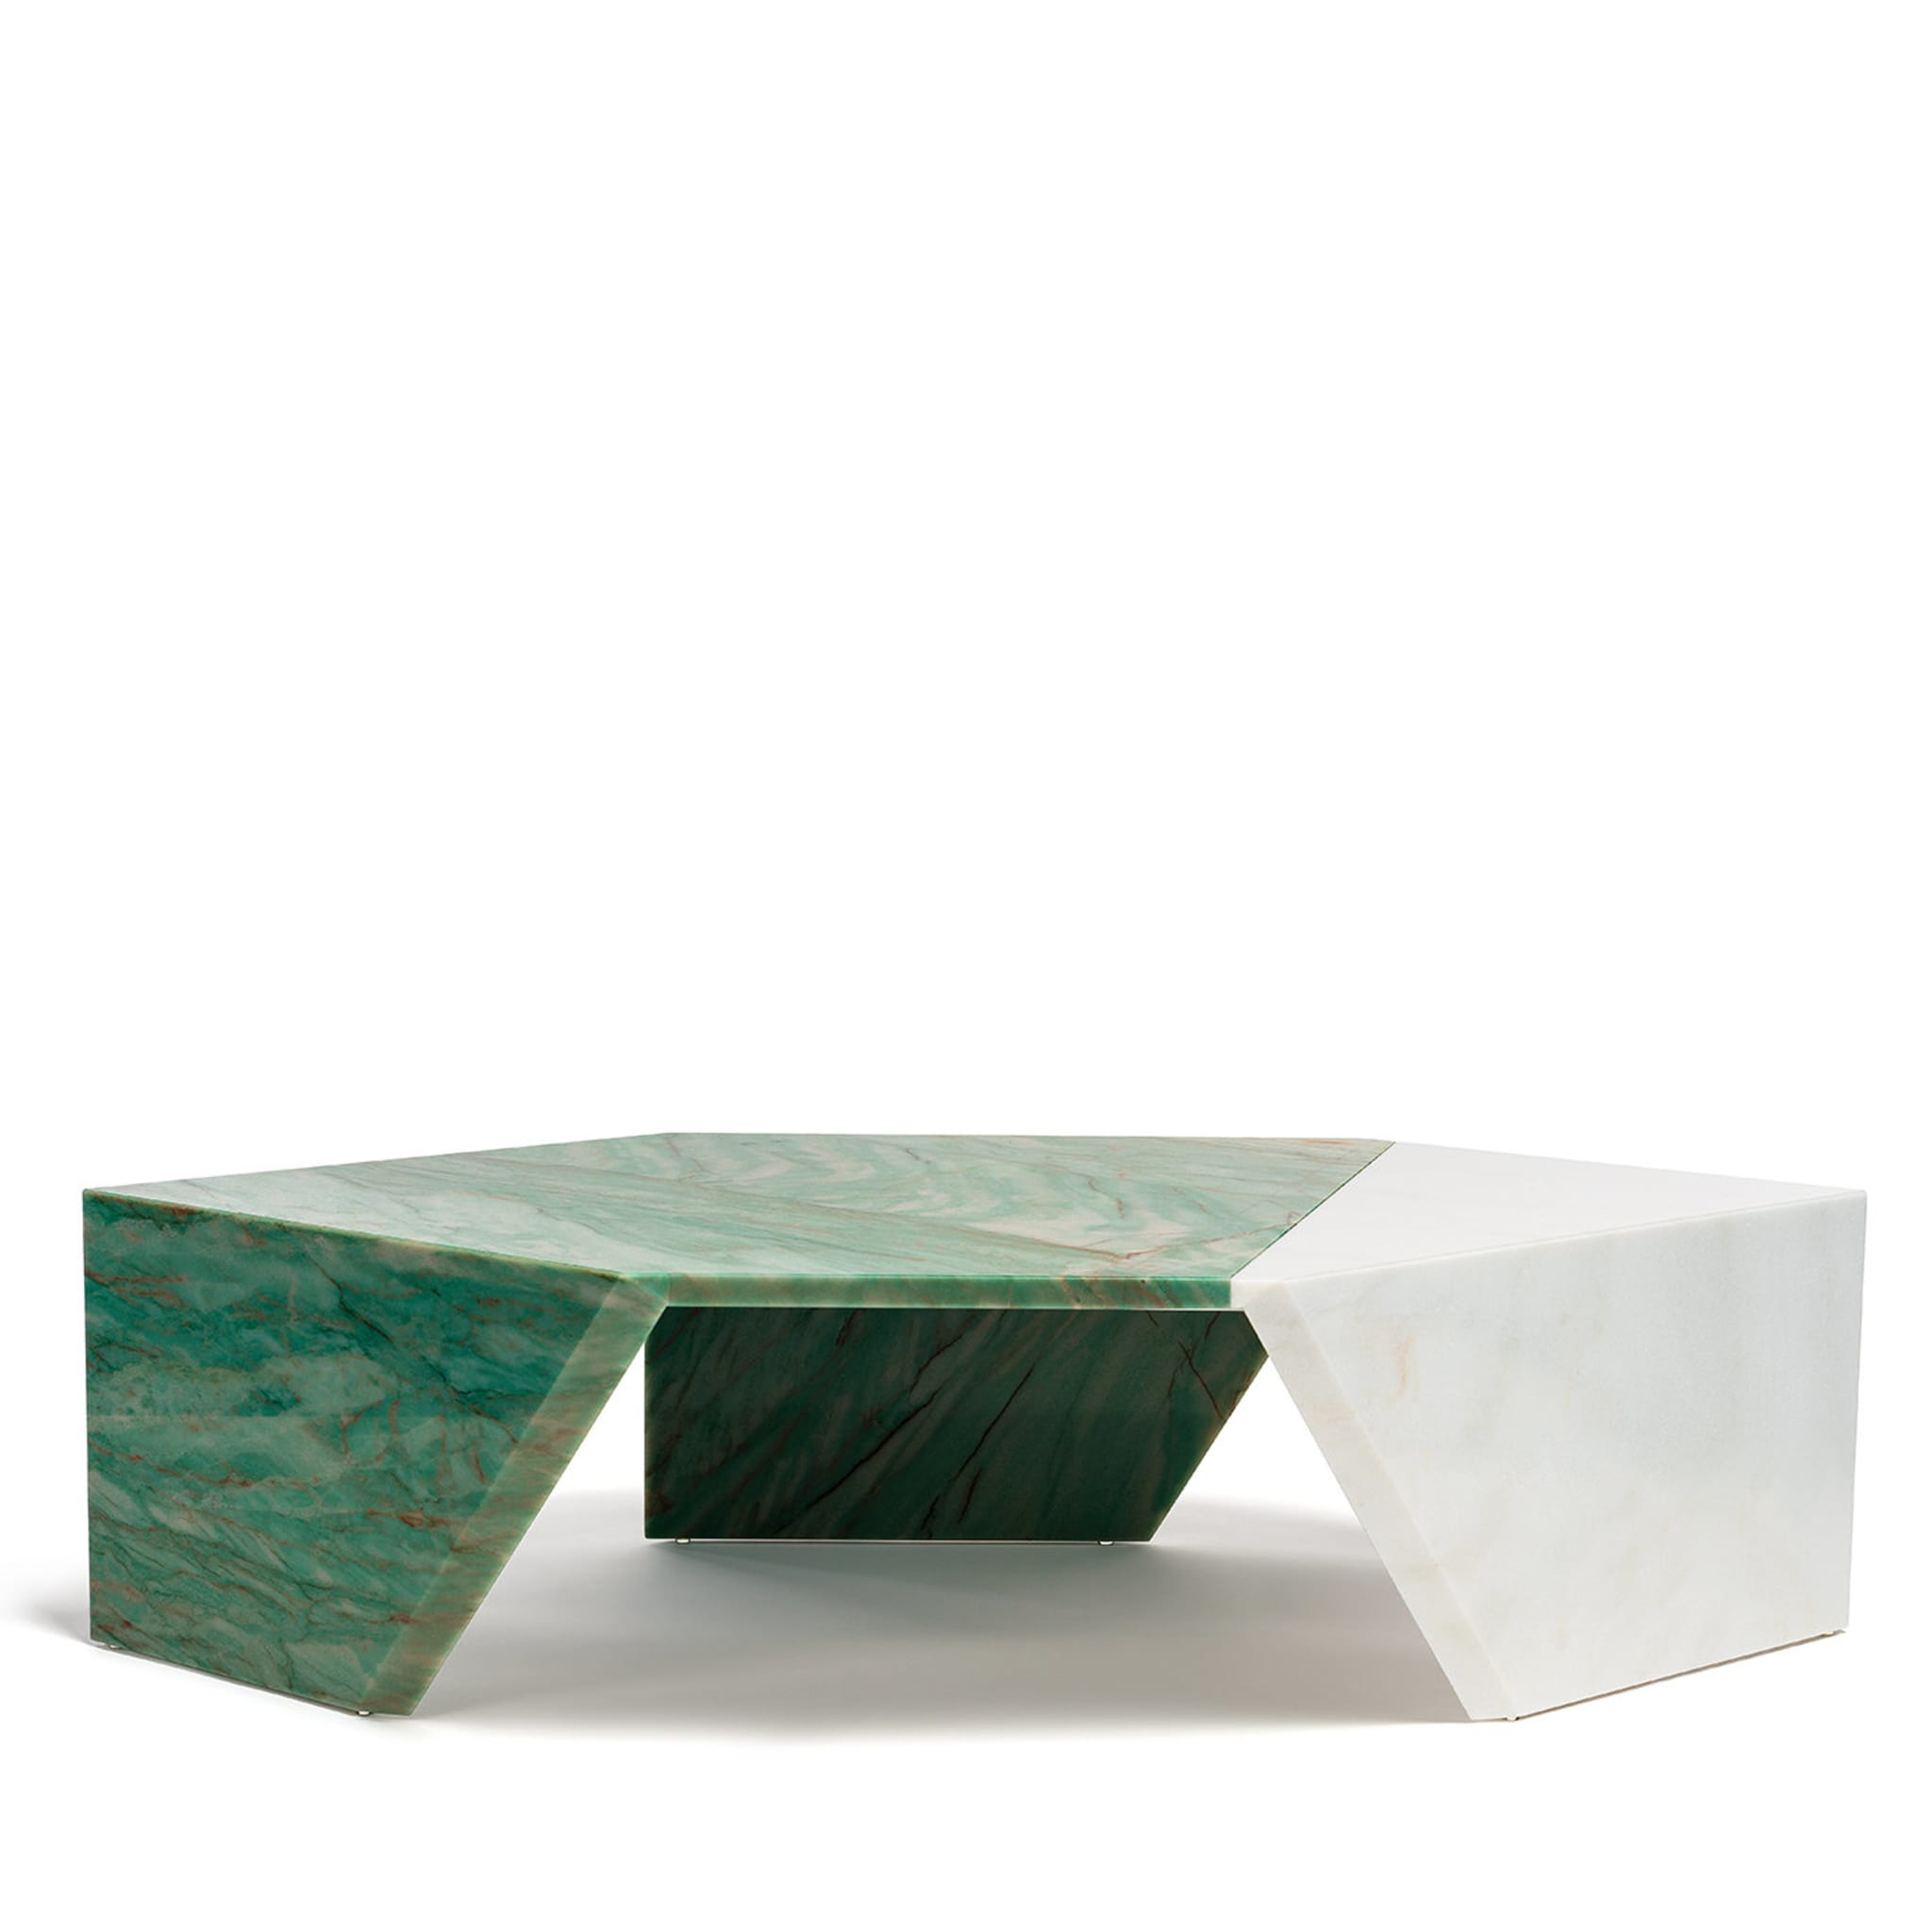 Green Origami Coffee Table by Patricia Urquiola - Alternative view 3